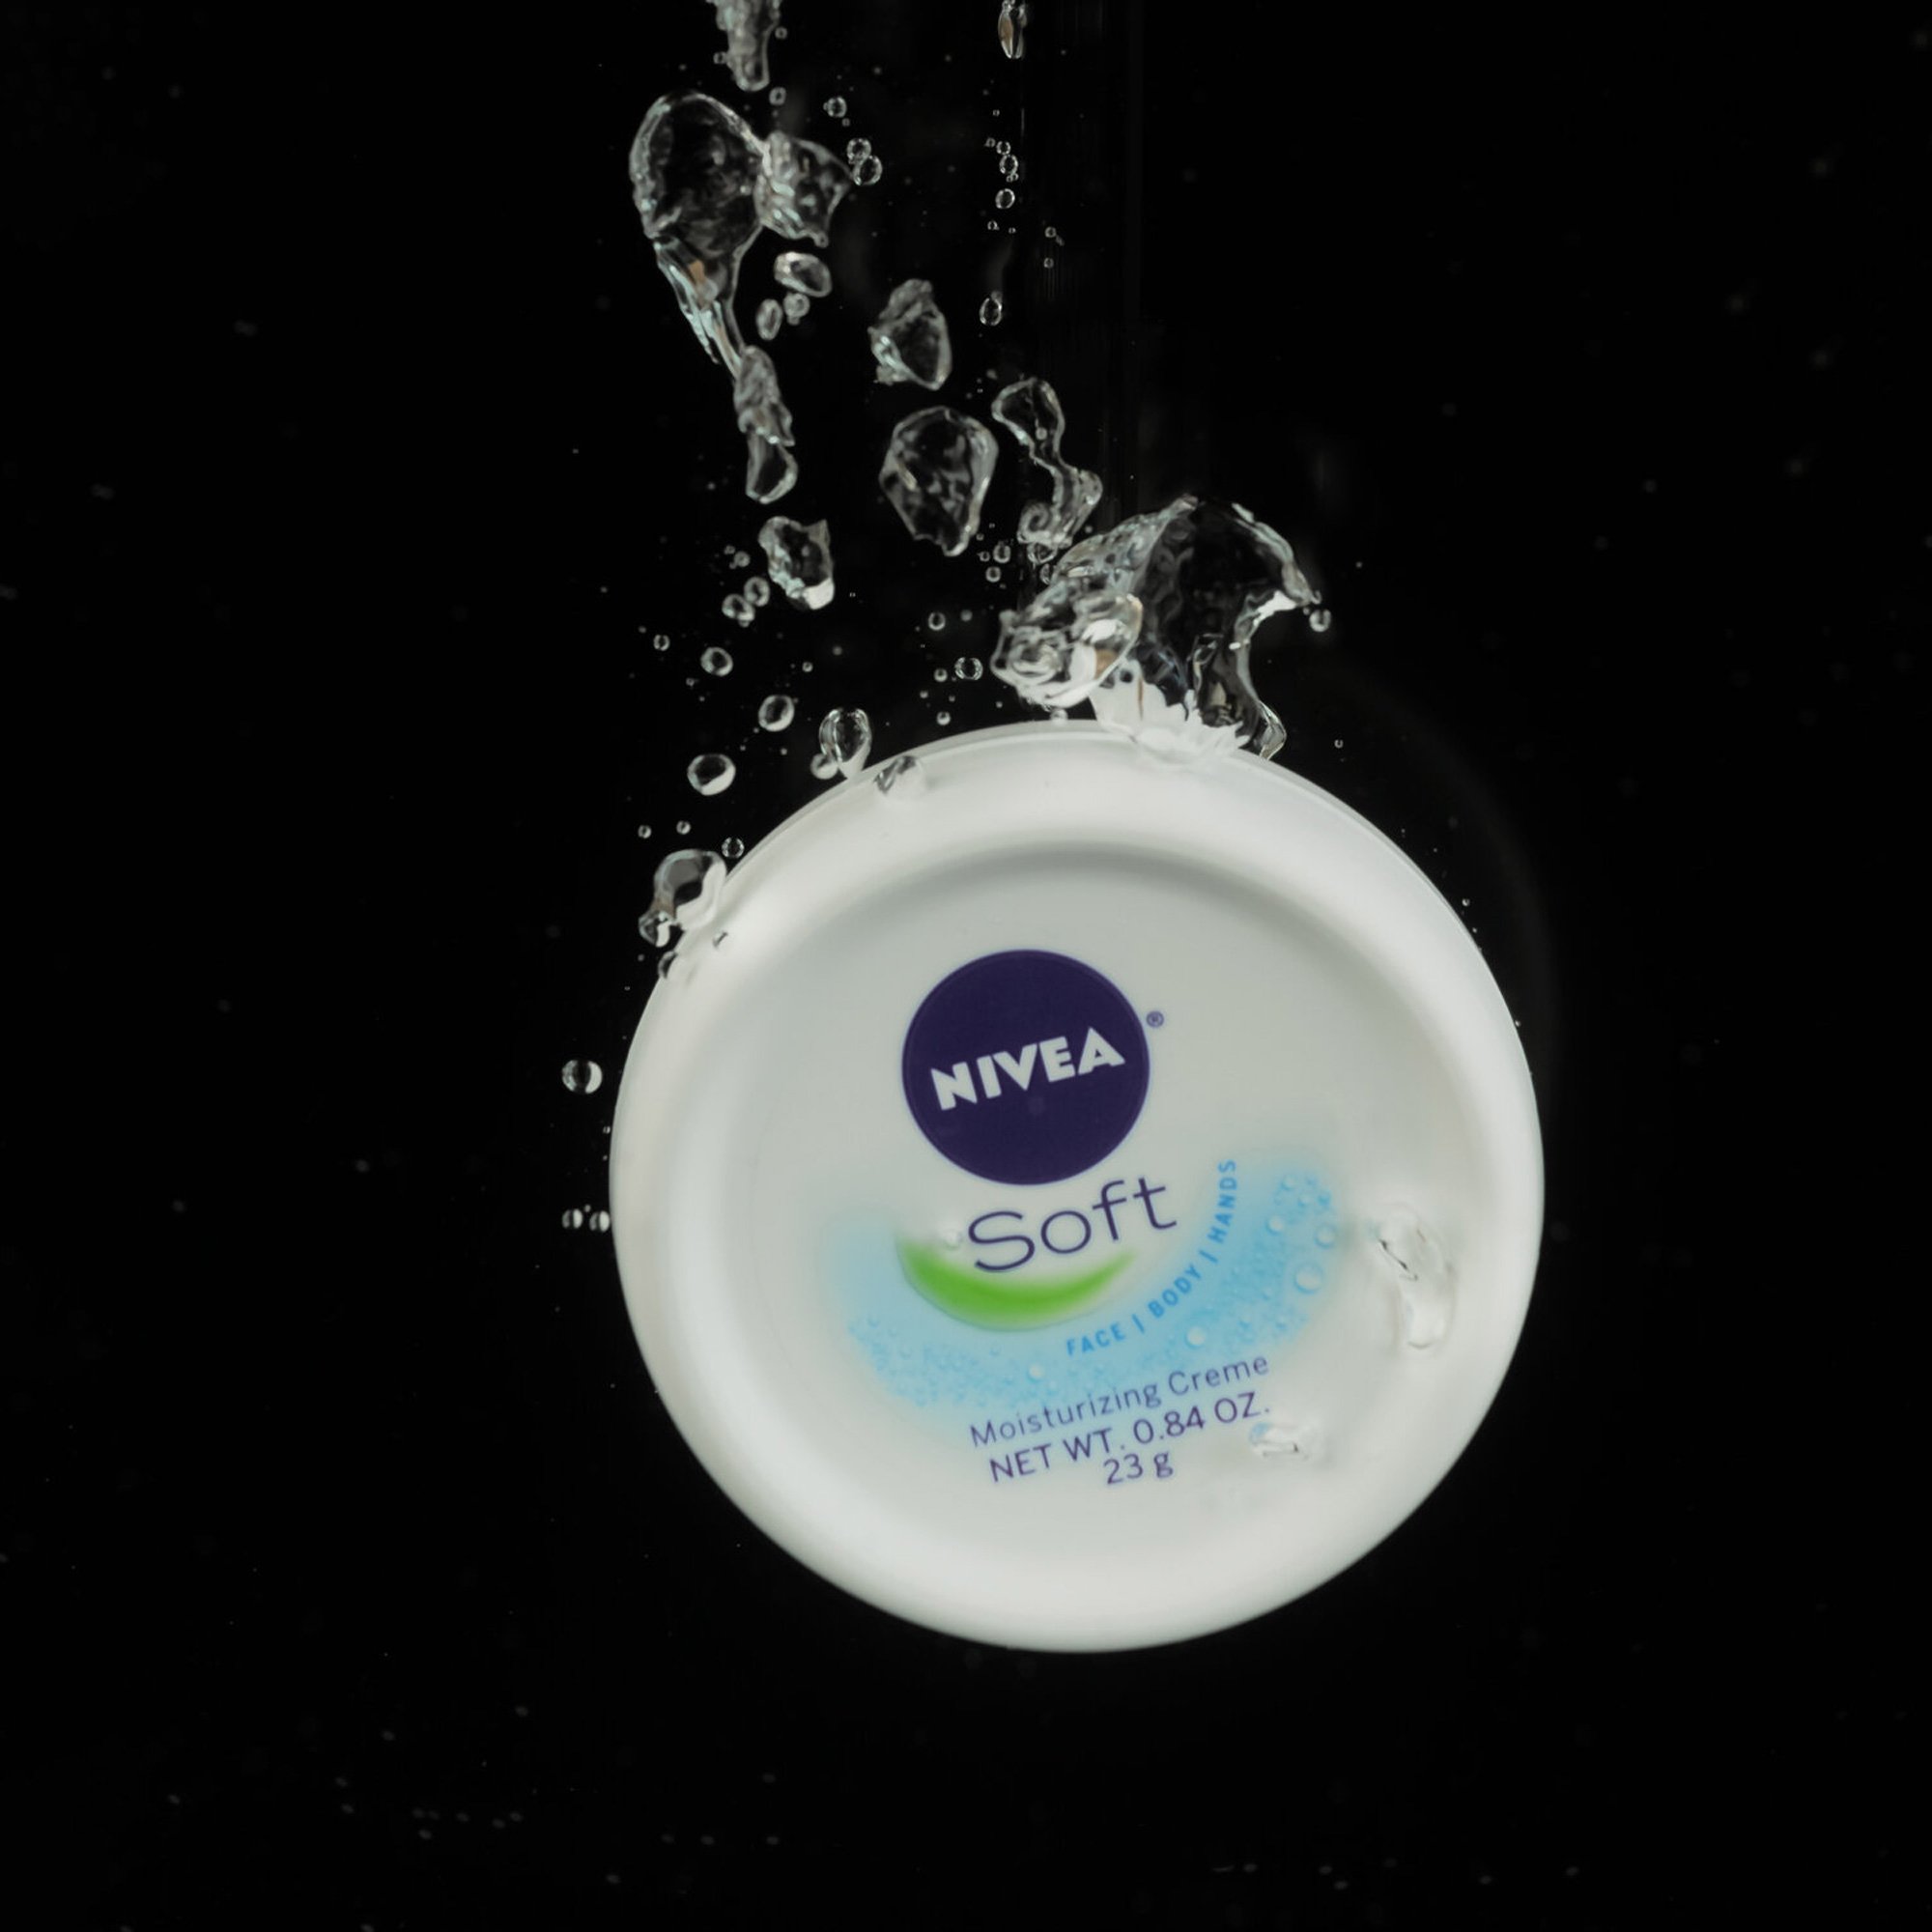  Splash photography for product photography is a good way to show off moisturizer lotion 